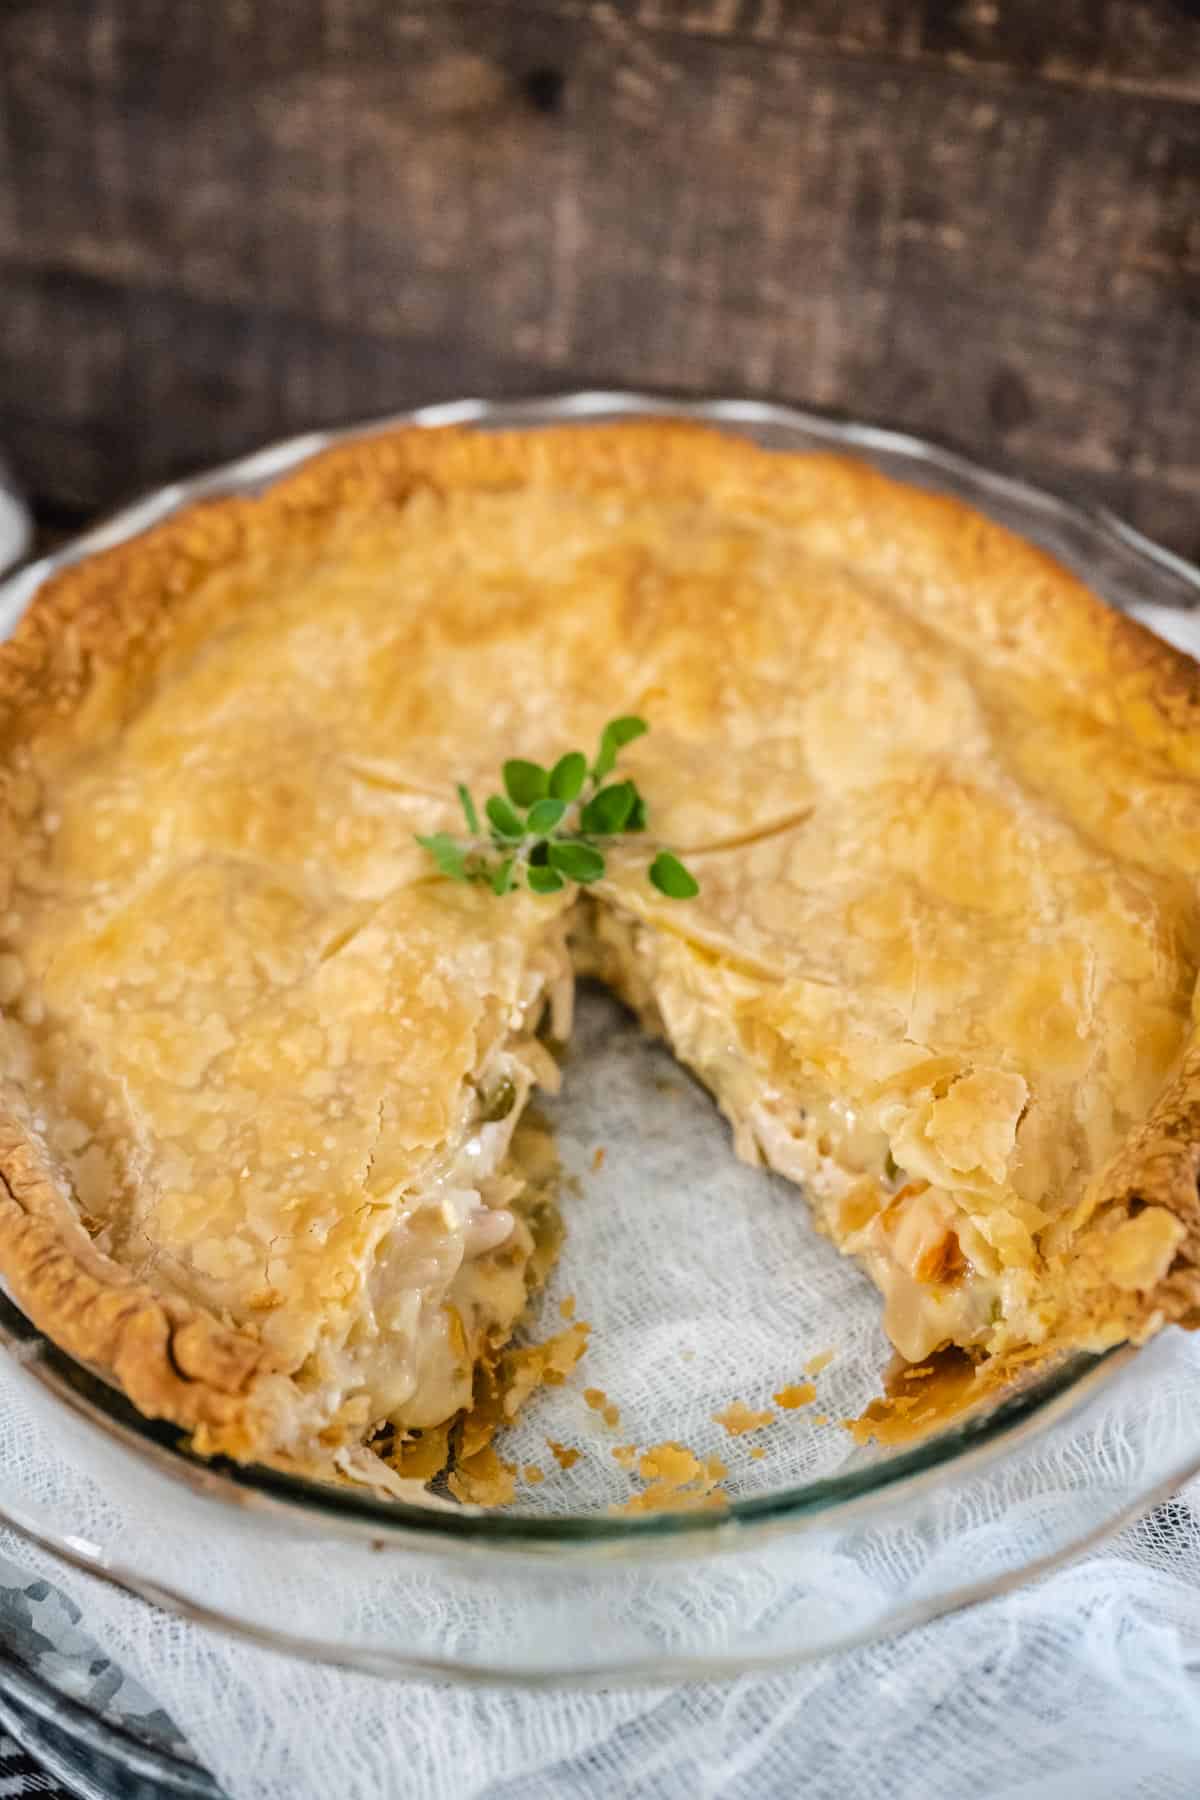 A chicken pot pie in a clear pie dish with one slice cut away from the whole pie.